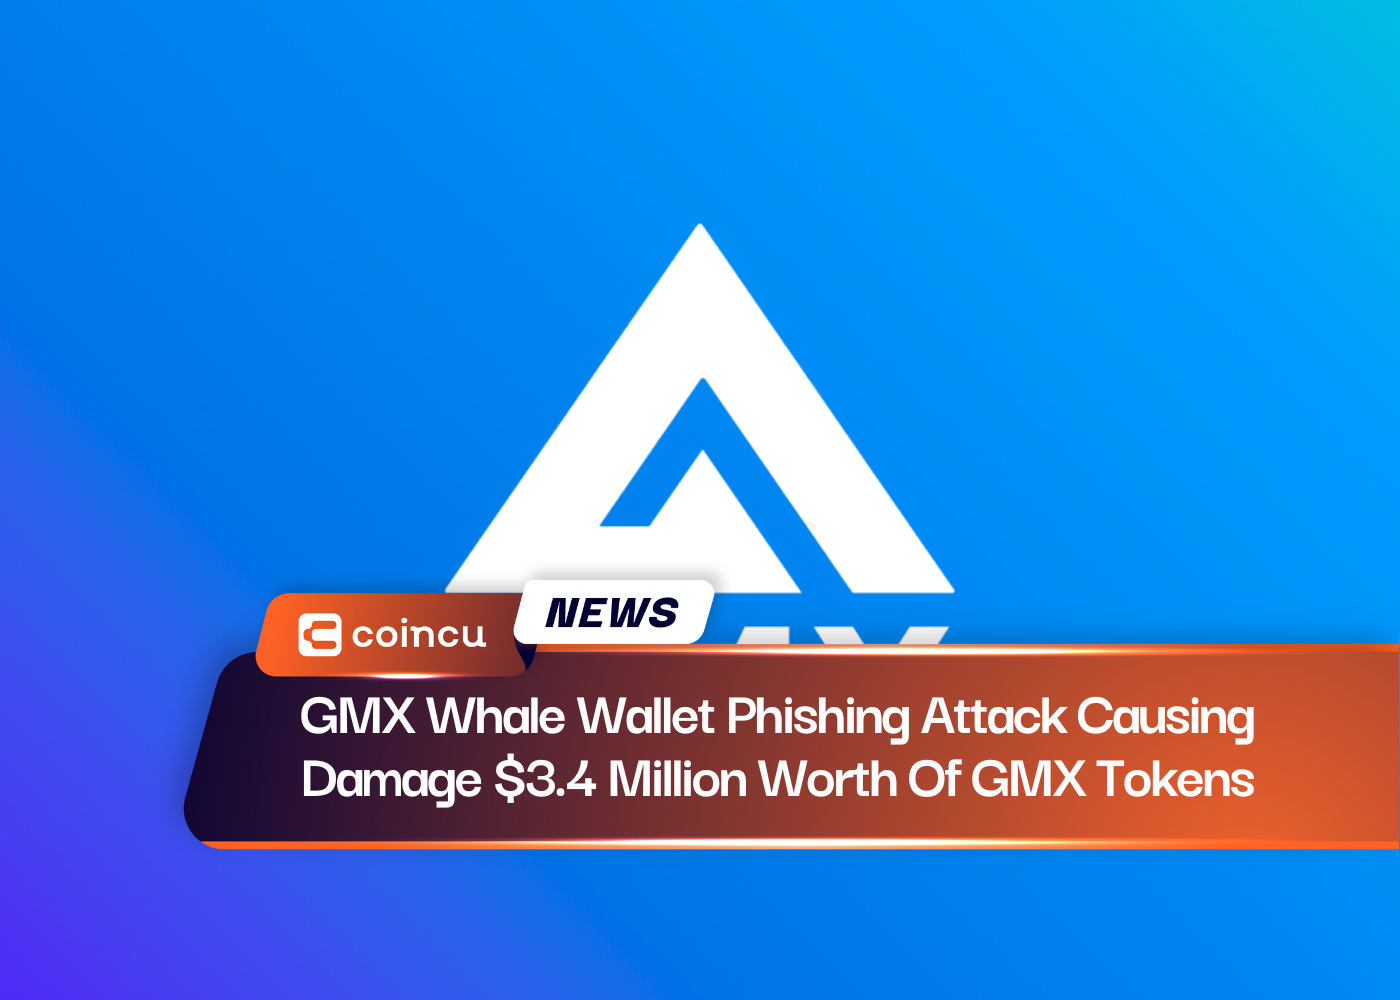 GMX Whale Wallet Phishing Attack Causing Damage $3.4 Million Worth Of GMX Tokens